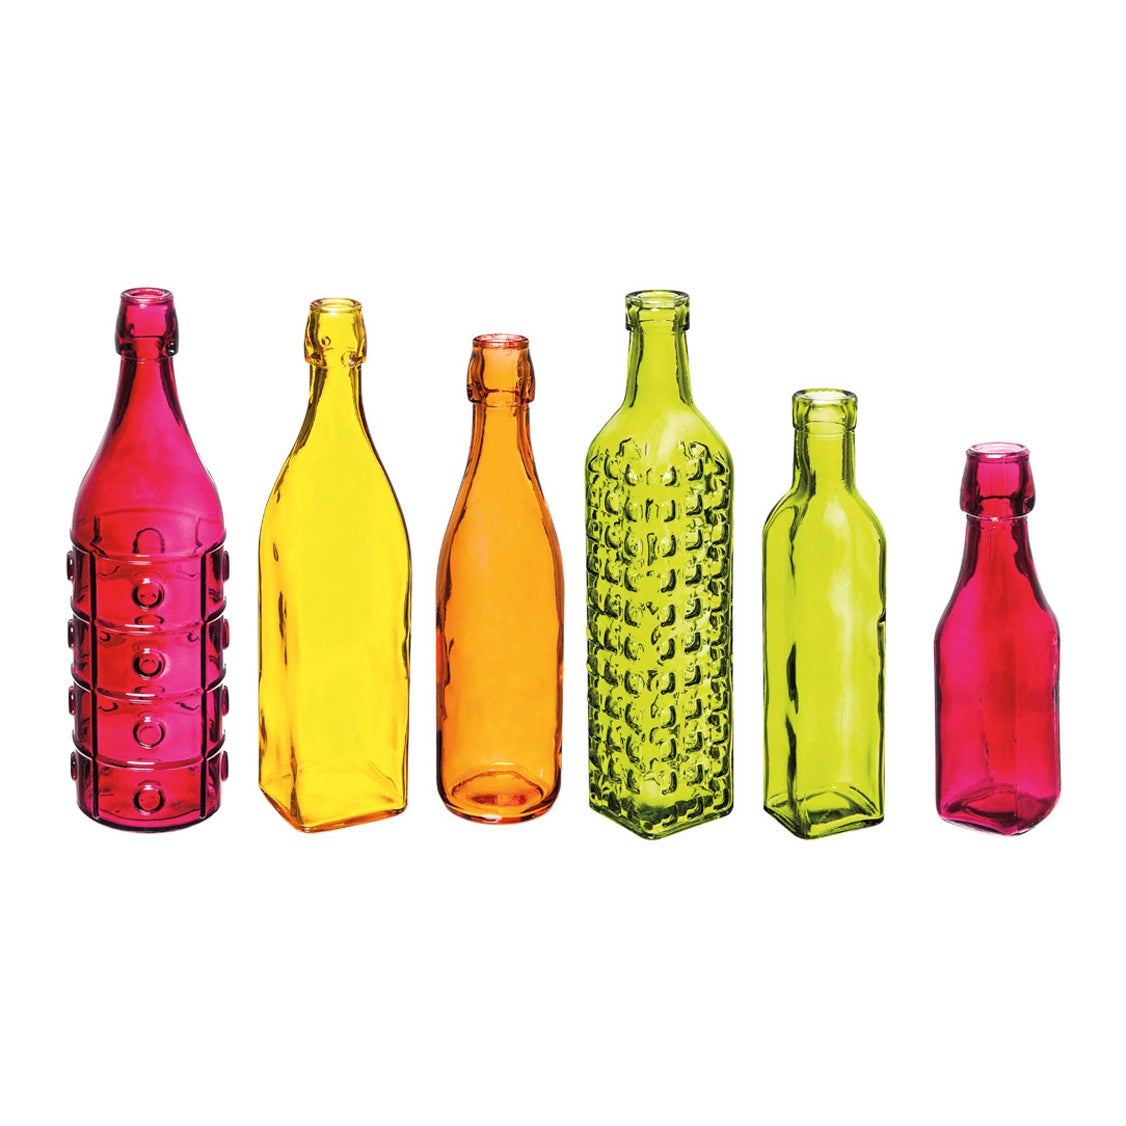 Decorate Your Garden, Glass Bottle, set of 6